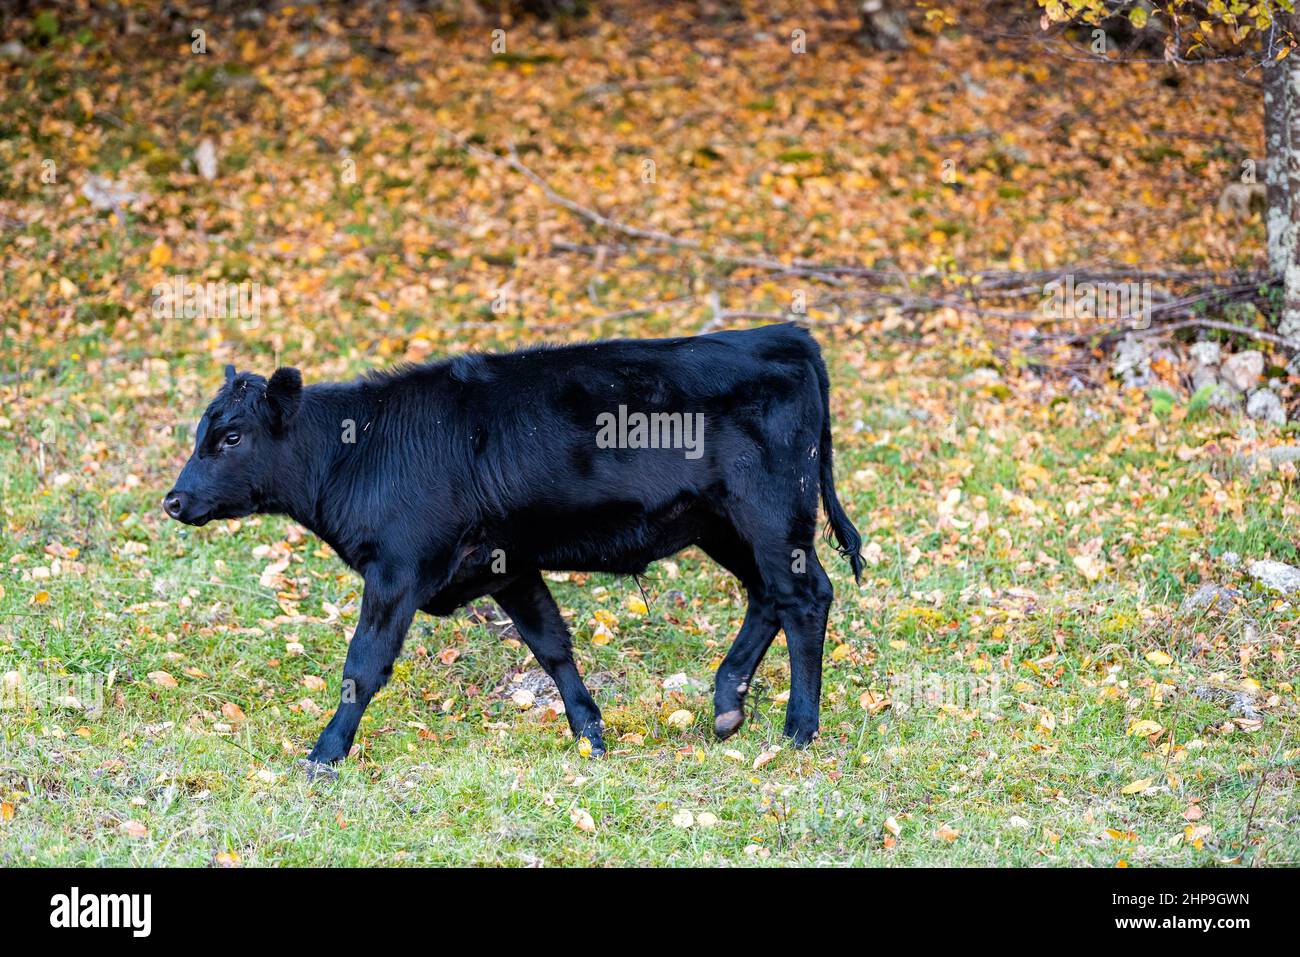 One grass-fed black young cow, calf walking and grazing on pasture grass field in Highland county, Virginia rural countryside farm during colorful aut Stock Photo